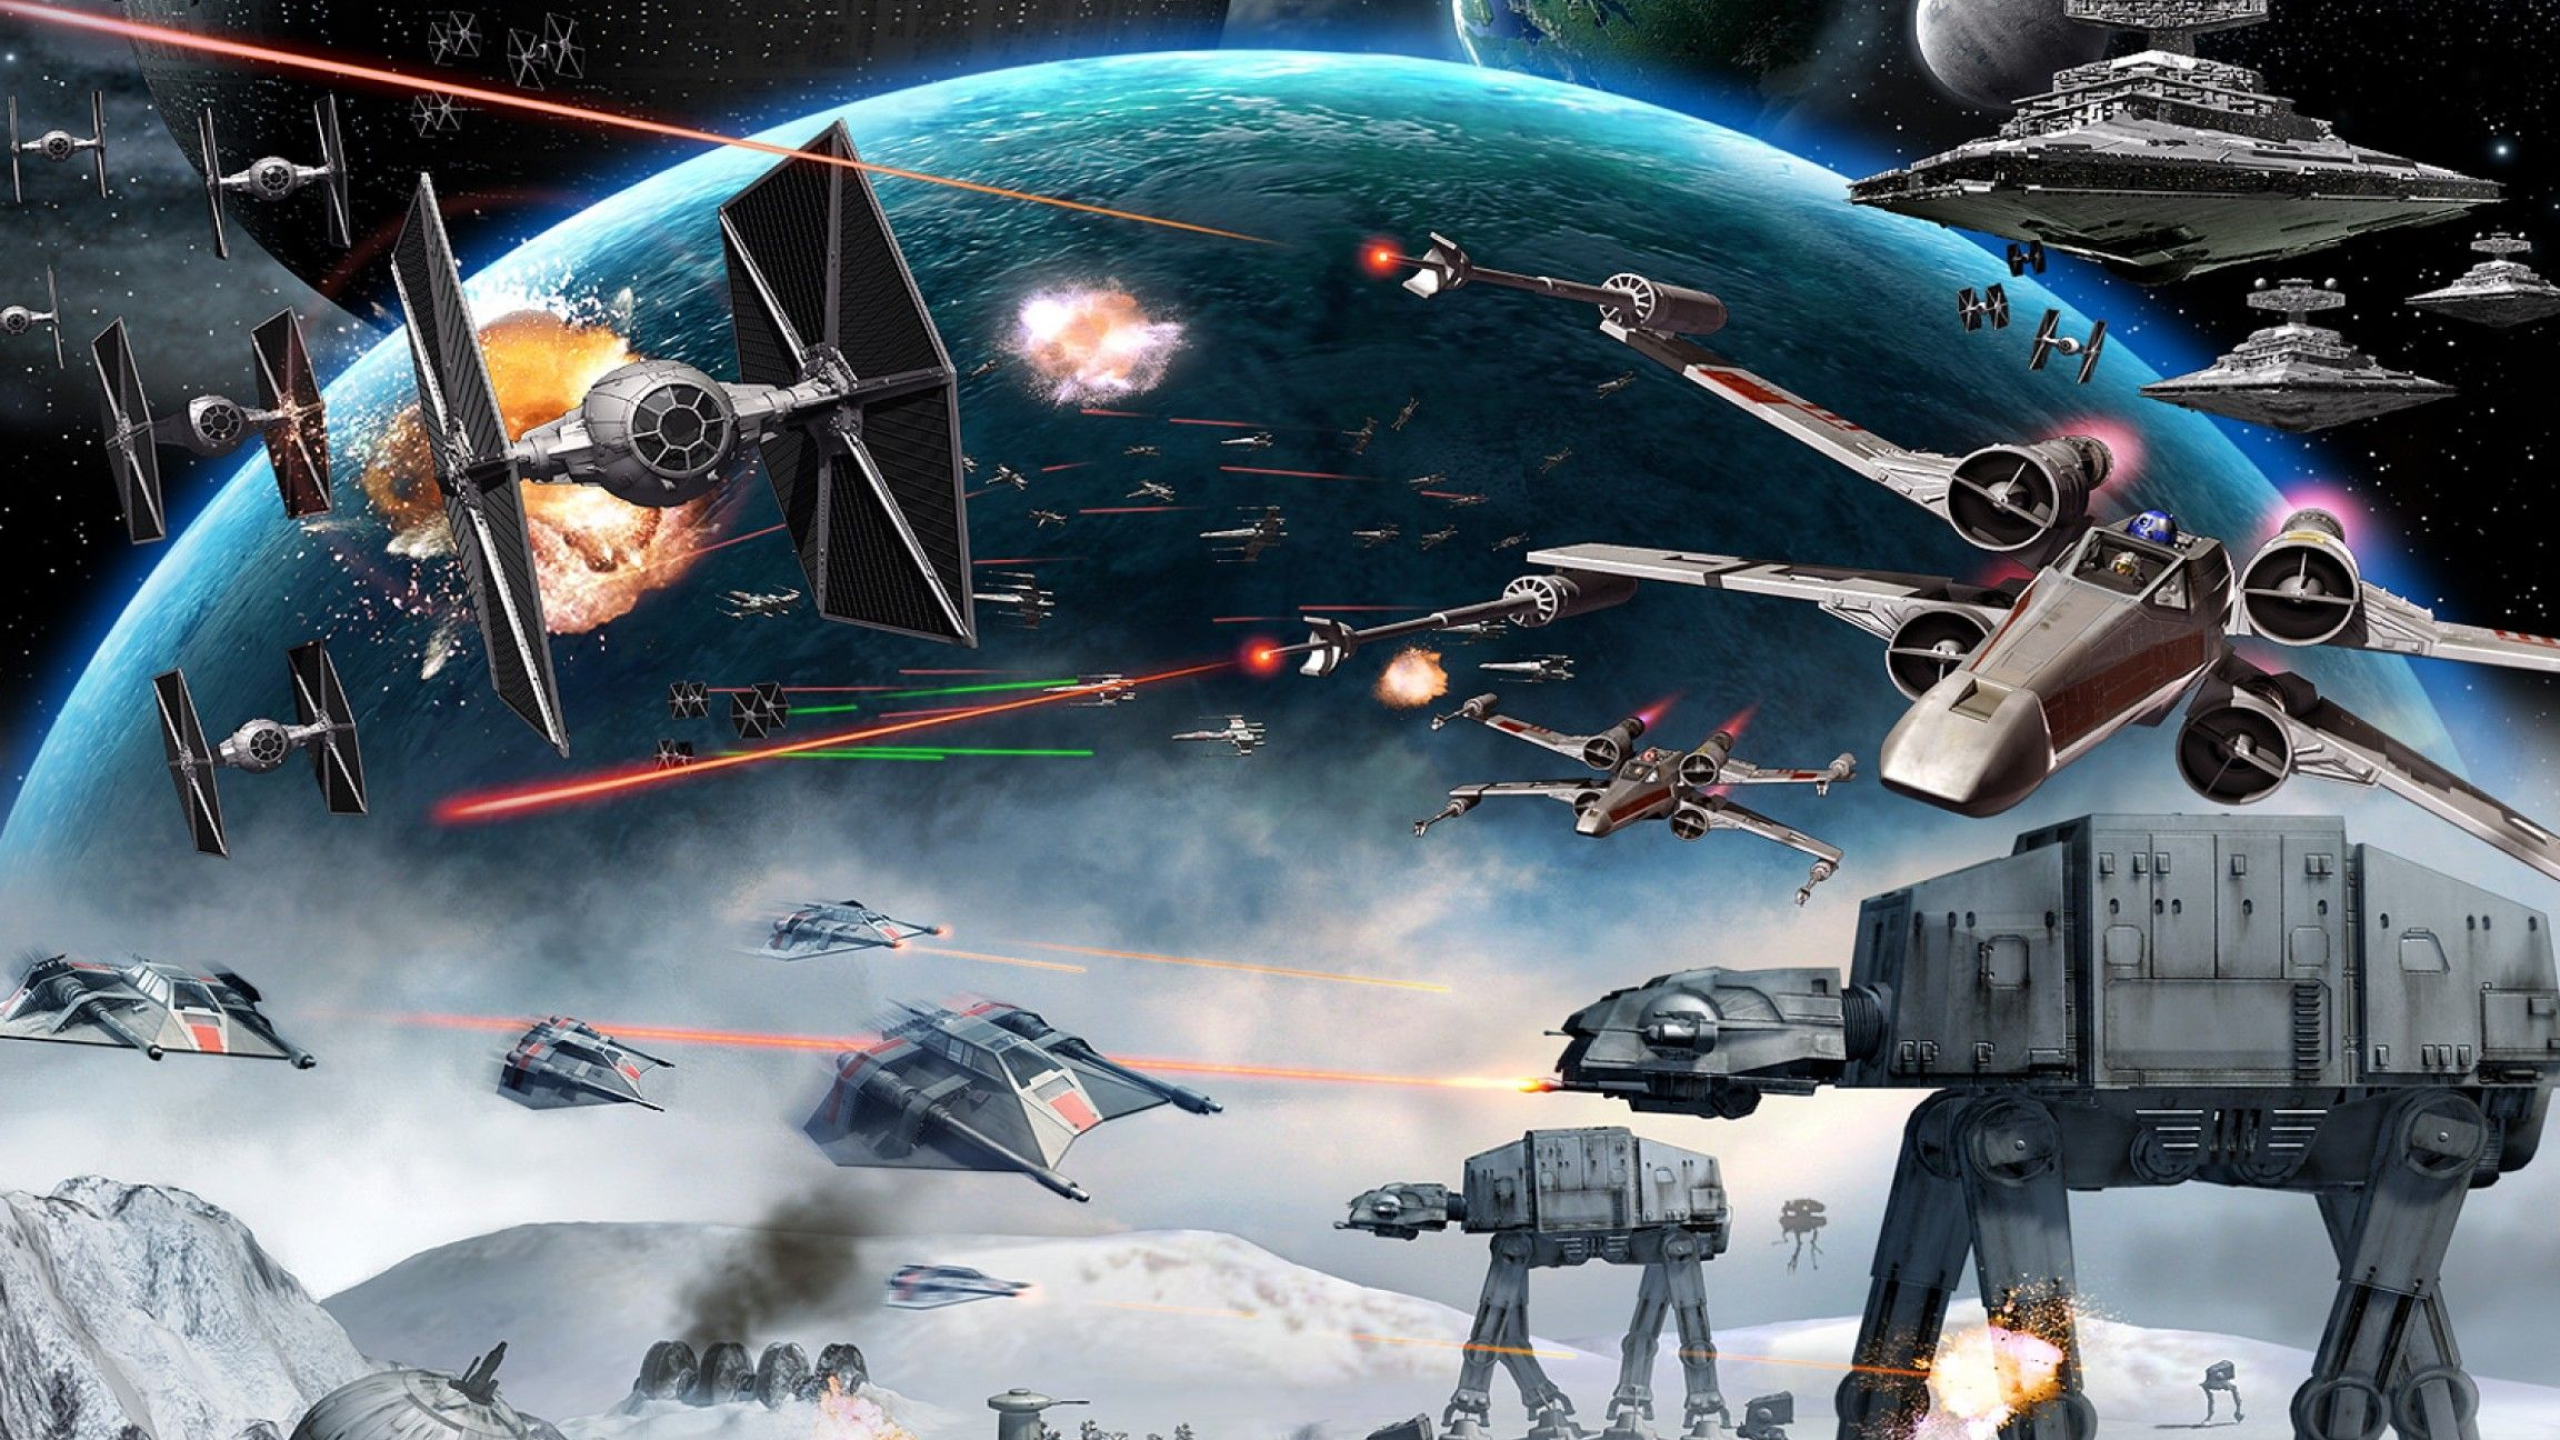 2560x1440 Star Wars Space Battle Wallpapers Top Free Star Wars Space Battle Backgrounds